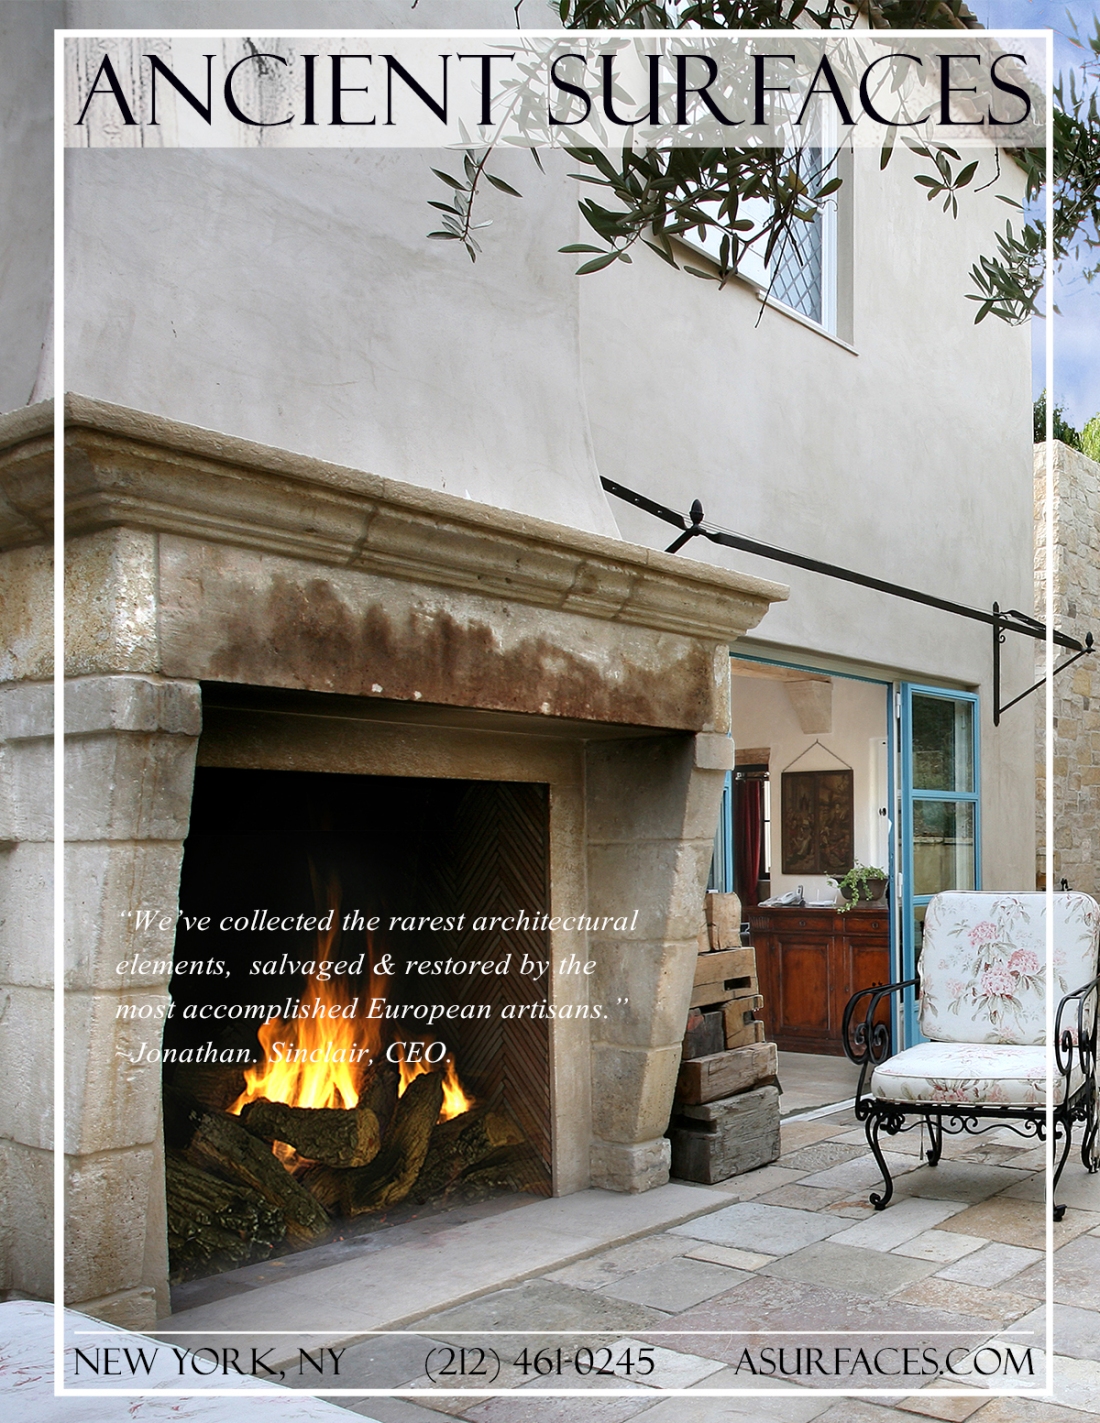 Reclaimed Medieval era antique stone fireplace installed in an outdoor open patio, Coastal California.